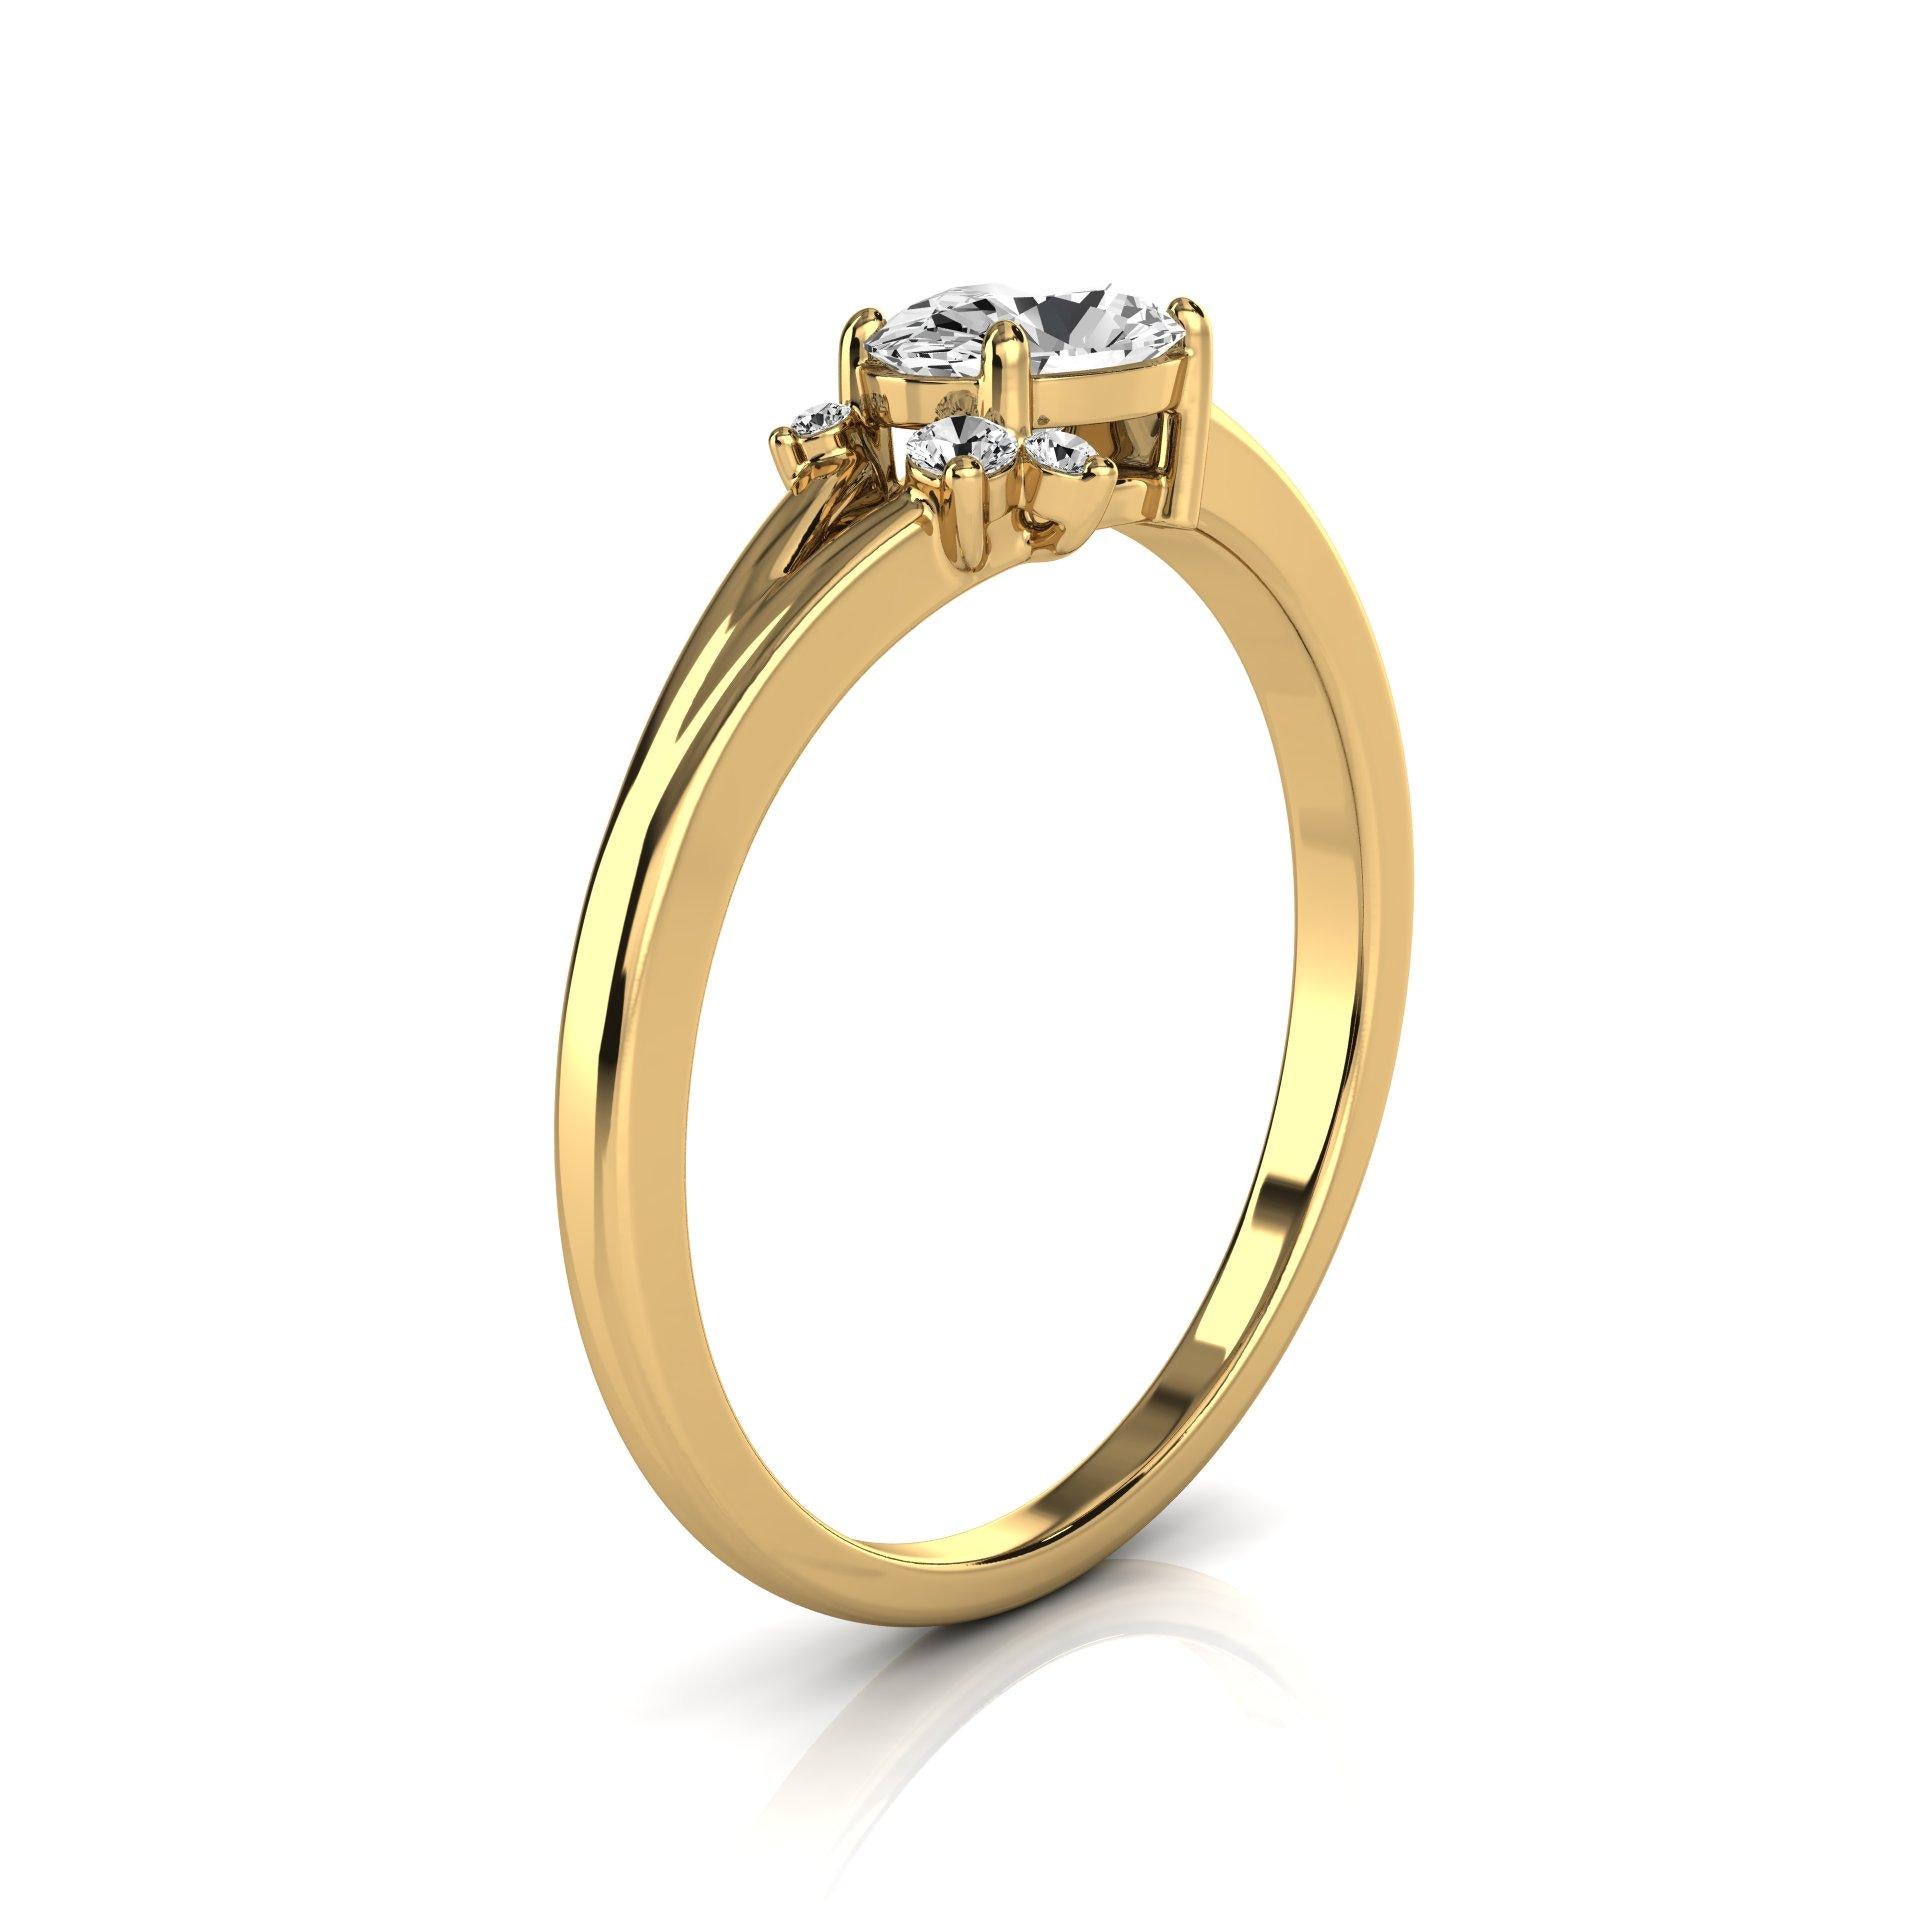 This petite handcrafted earthy, organically designed ring features an Oval shape diamond in total carat weight of 1/2 of a carat, complimented by three (3) round diamonds in a total weight of 0.03 carat, adding to its rustic style. Experience the